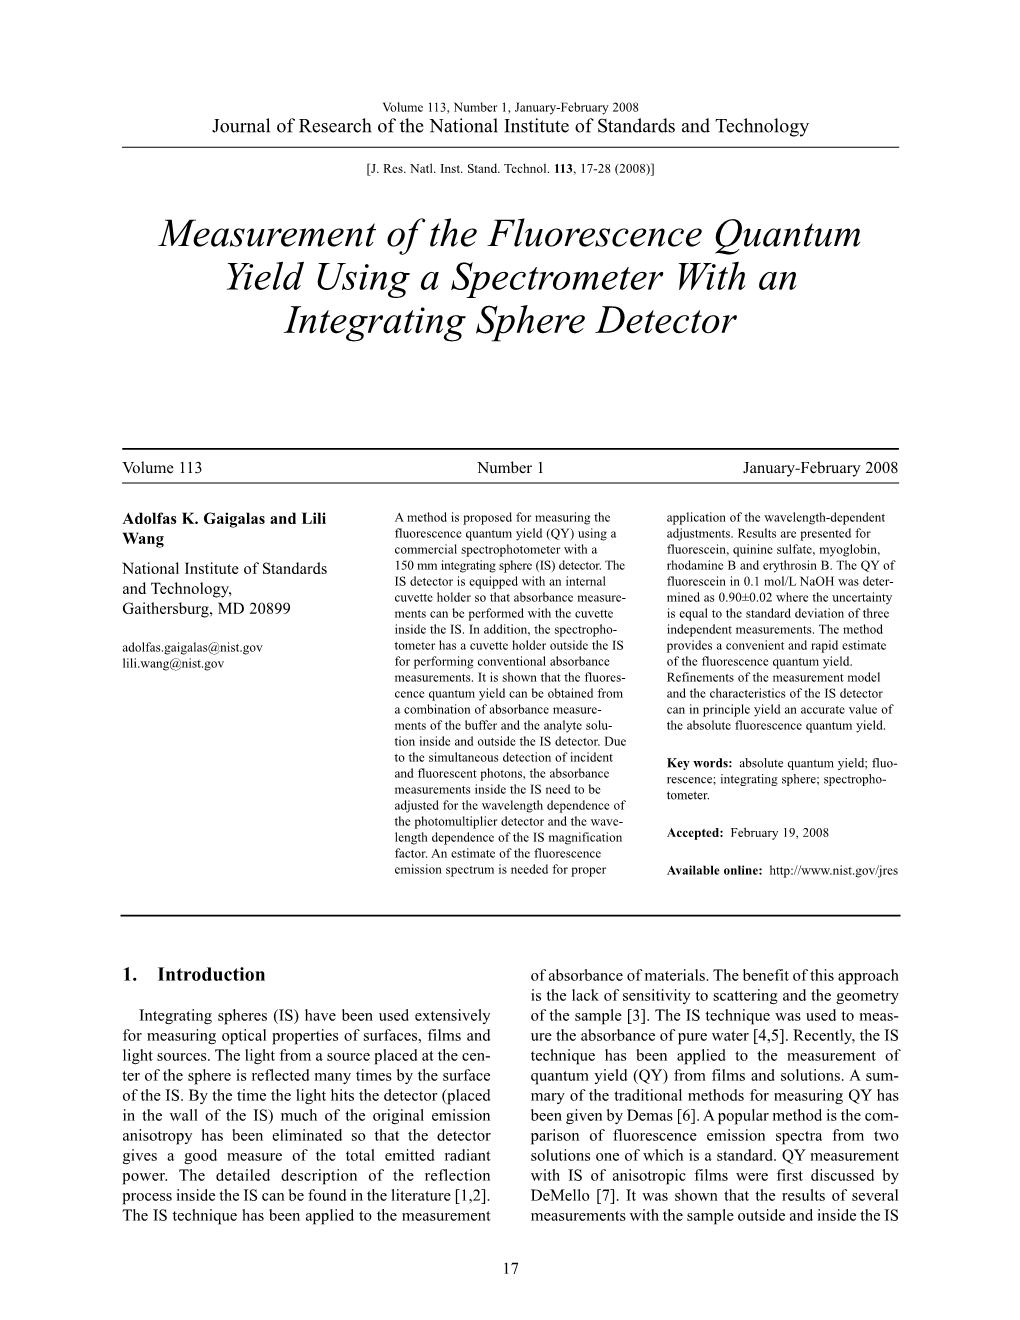 Measurement of the Fluorescence Quantum Yield Using a Spectrometer with an Integrating Sphere Detector